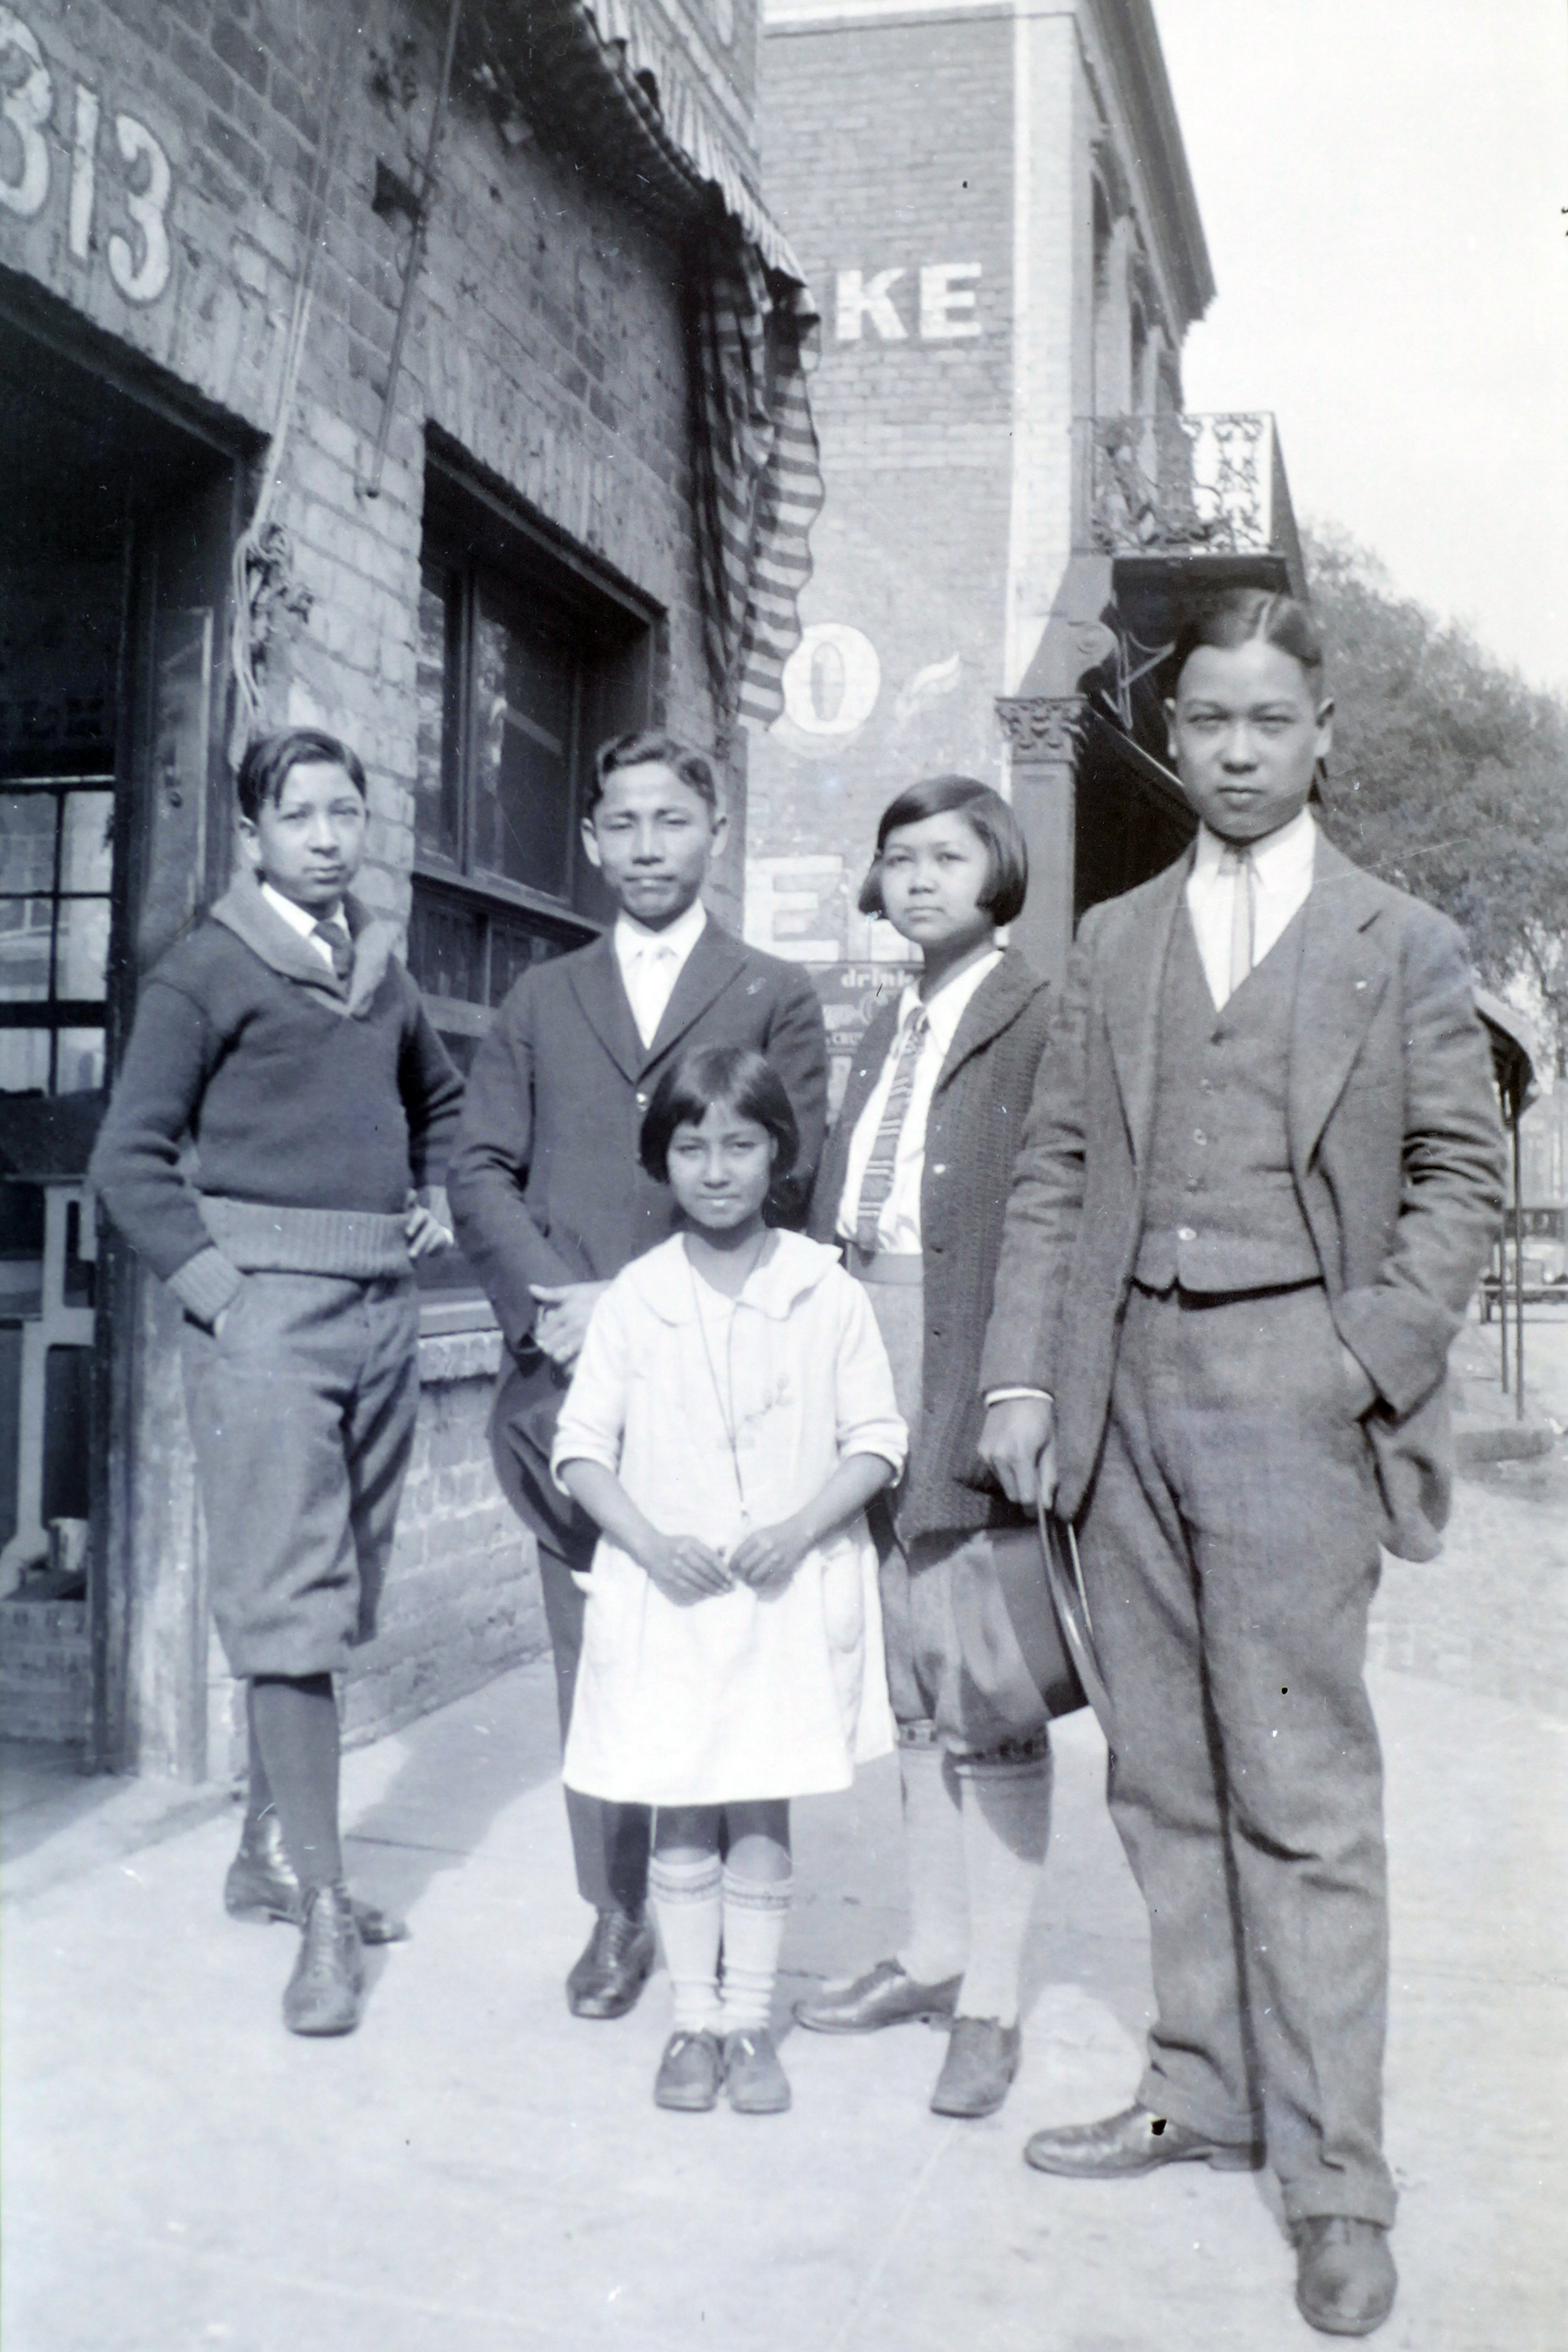 Front row: my littlest sister, Bernice. Back row, L-R: My brother Sandor, a Chinese friend from across town, my sister Gerald (in boy shorts), and my oldest brother, Archie. 